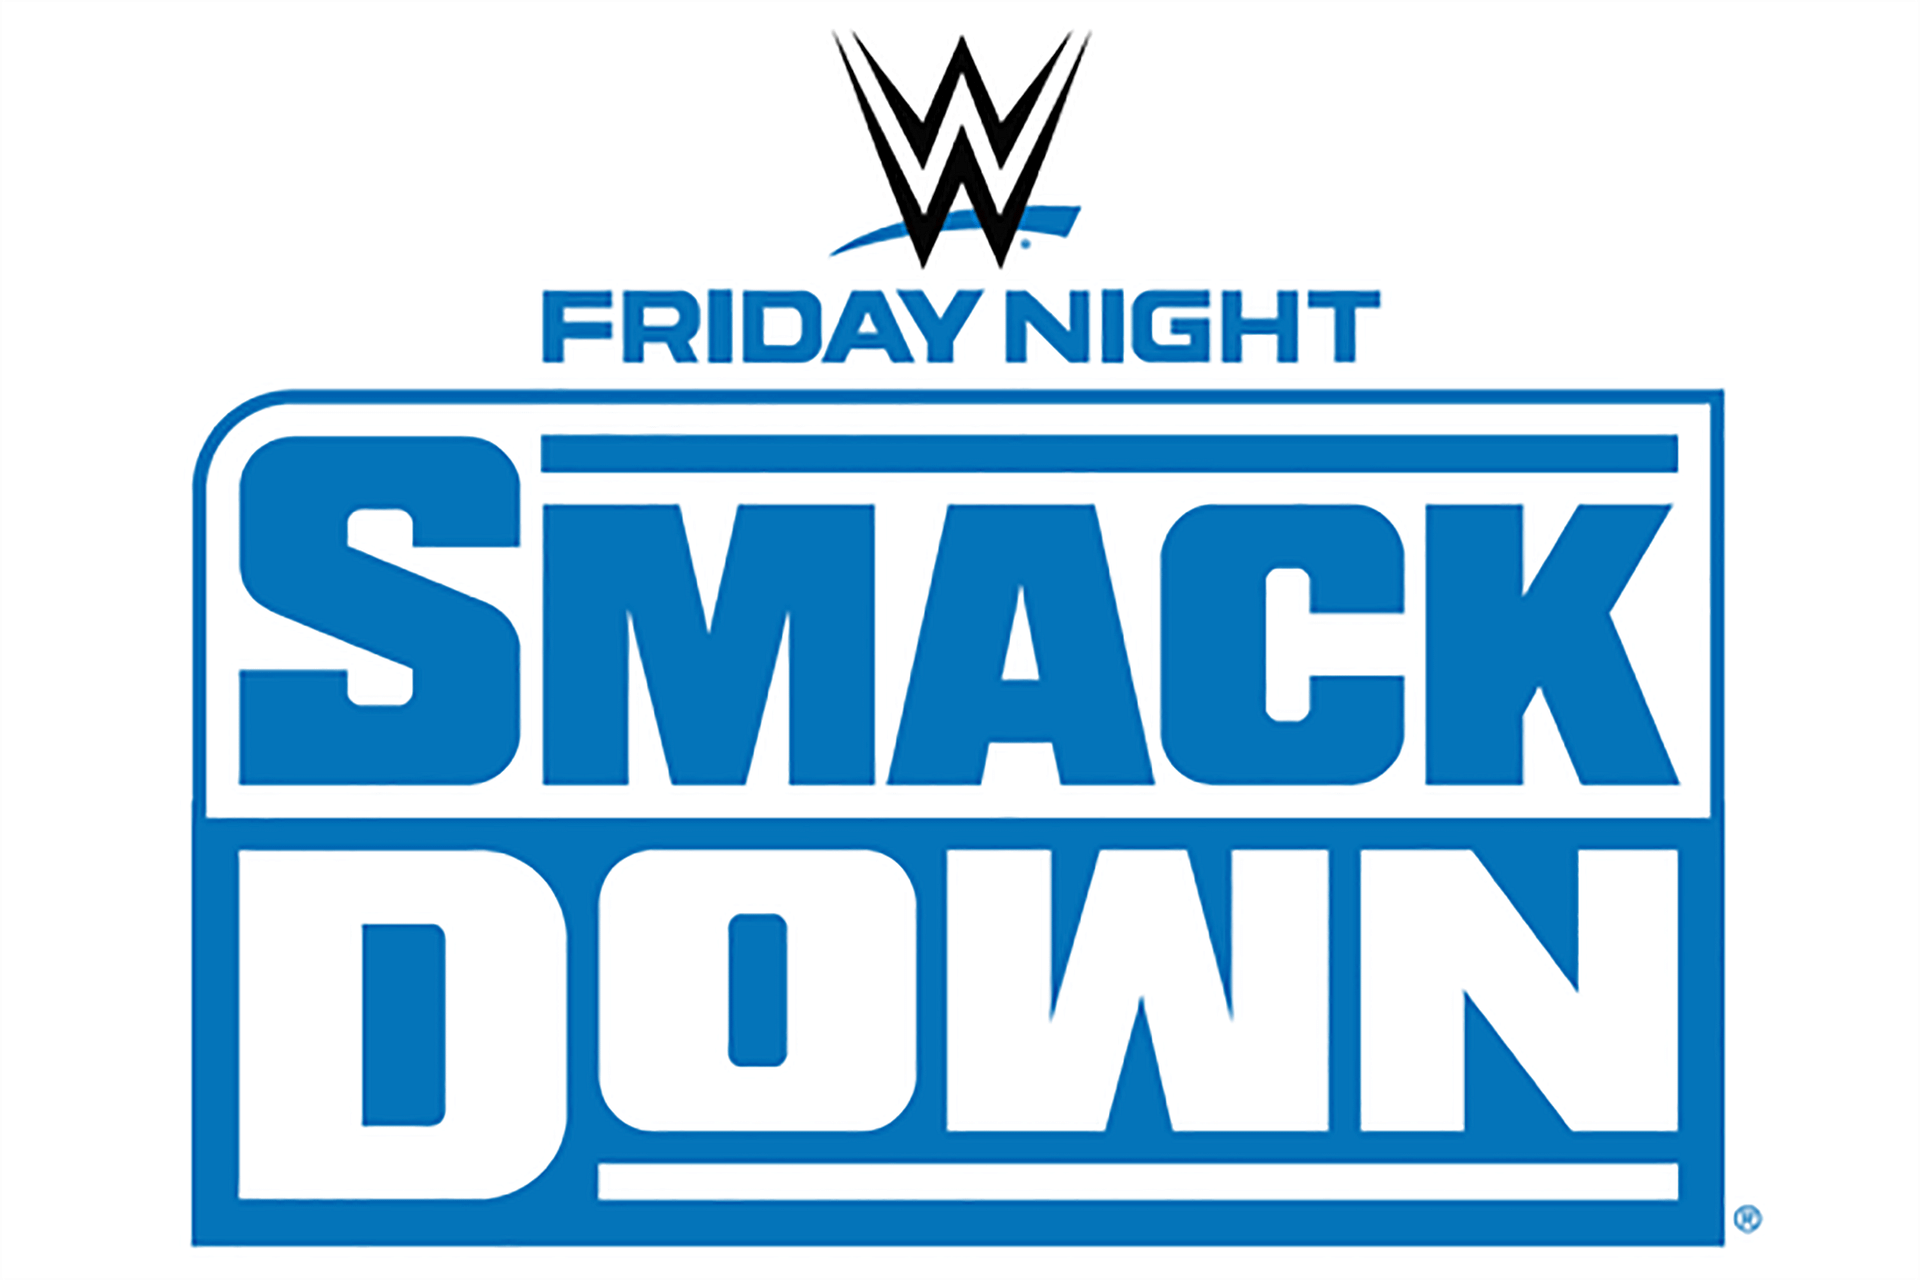 "Blue Hair" 
3. "Friday Night SmackDown" - wide 10